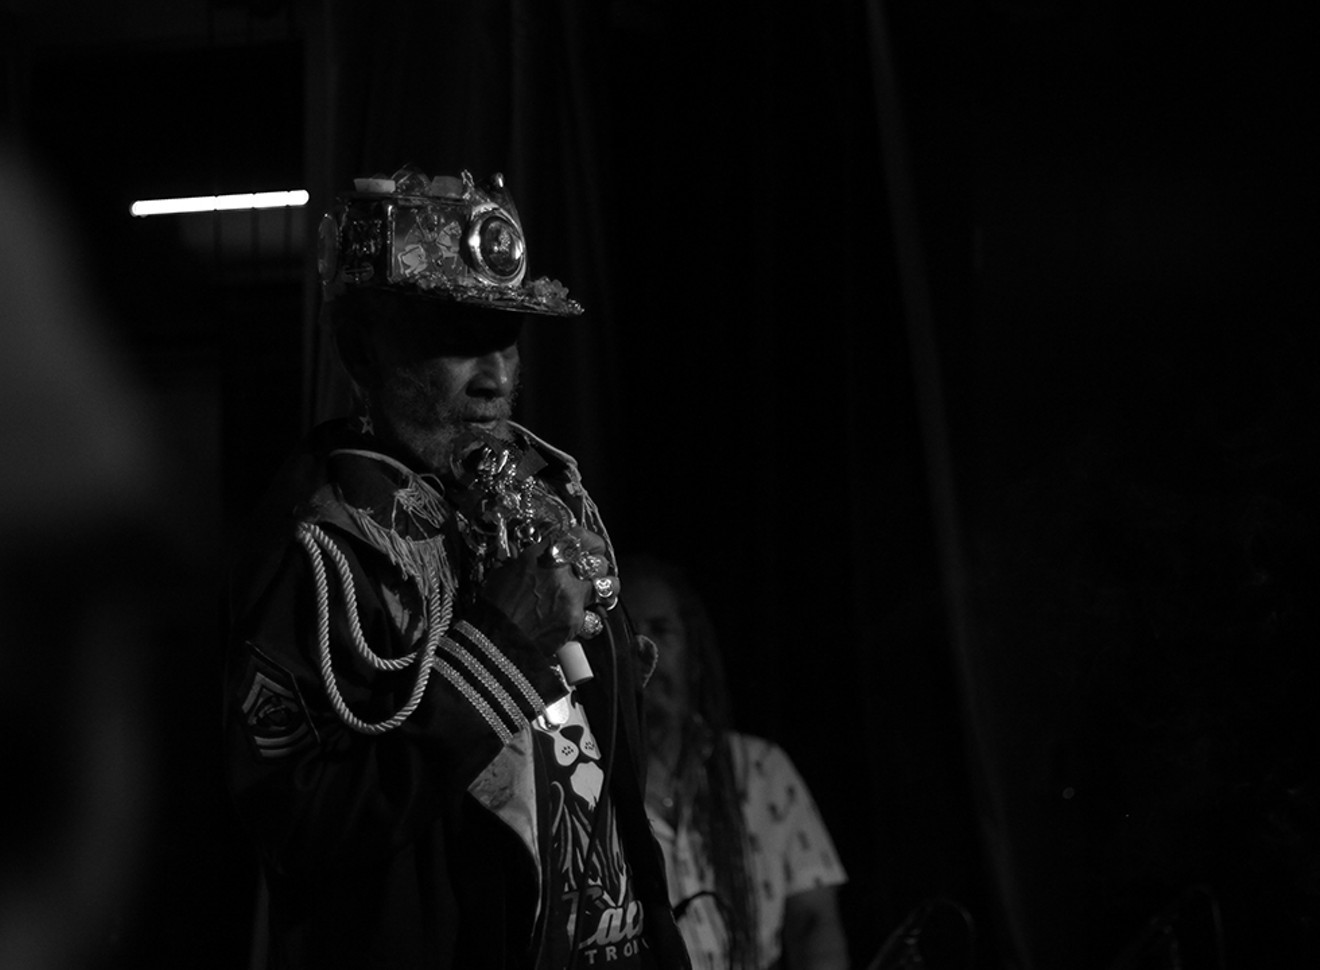 Lee "Scratch" Perry is also known as The Upsetter, The SuperApe or Pipecock Jackson.